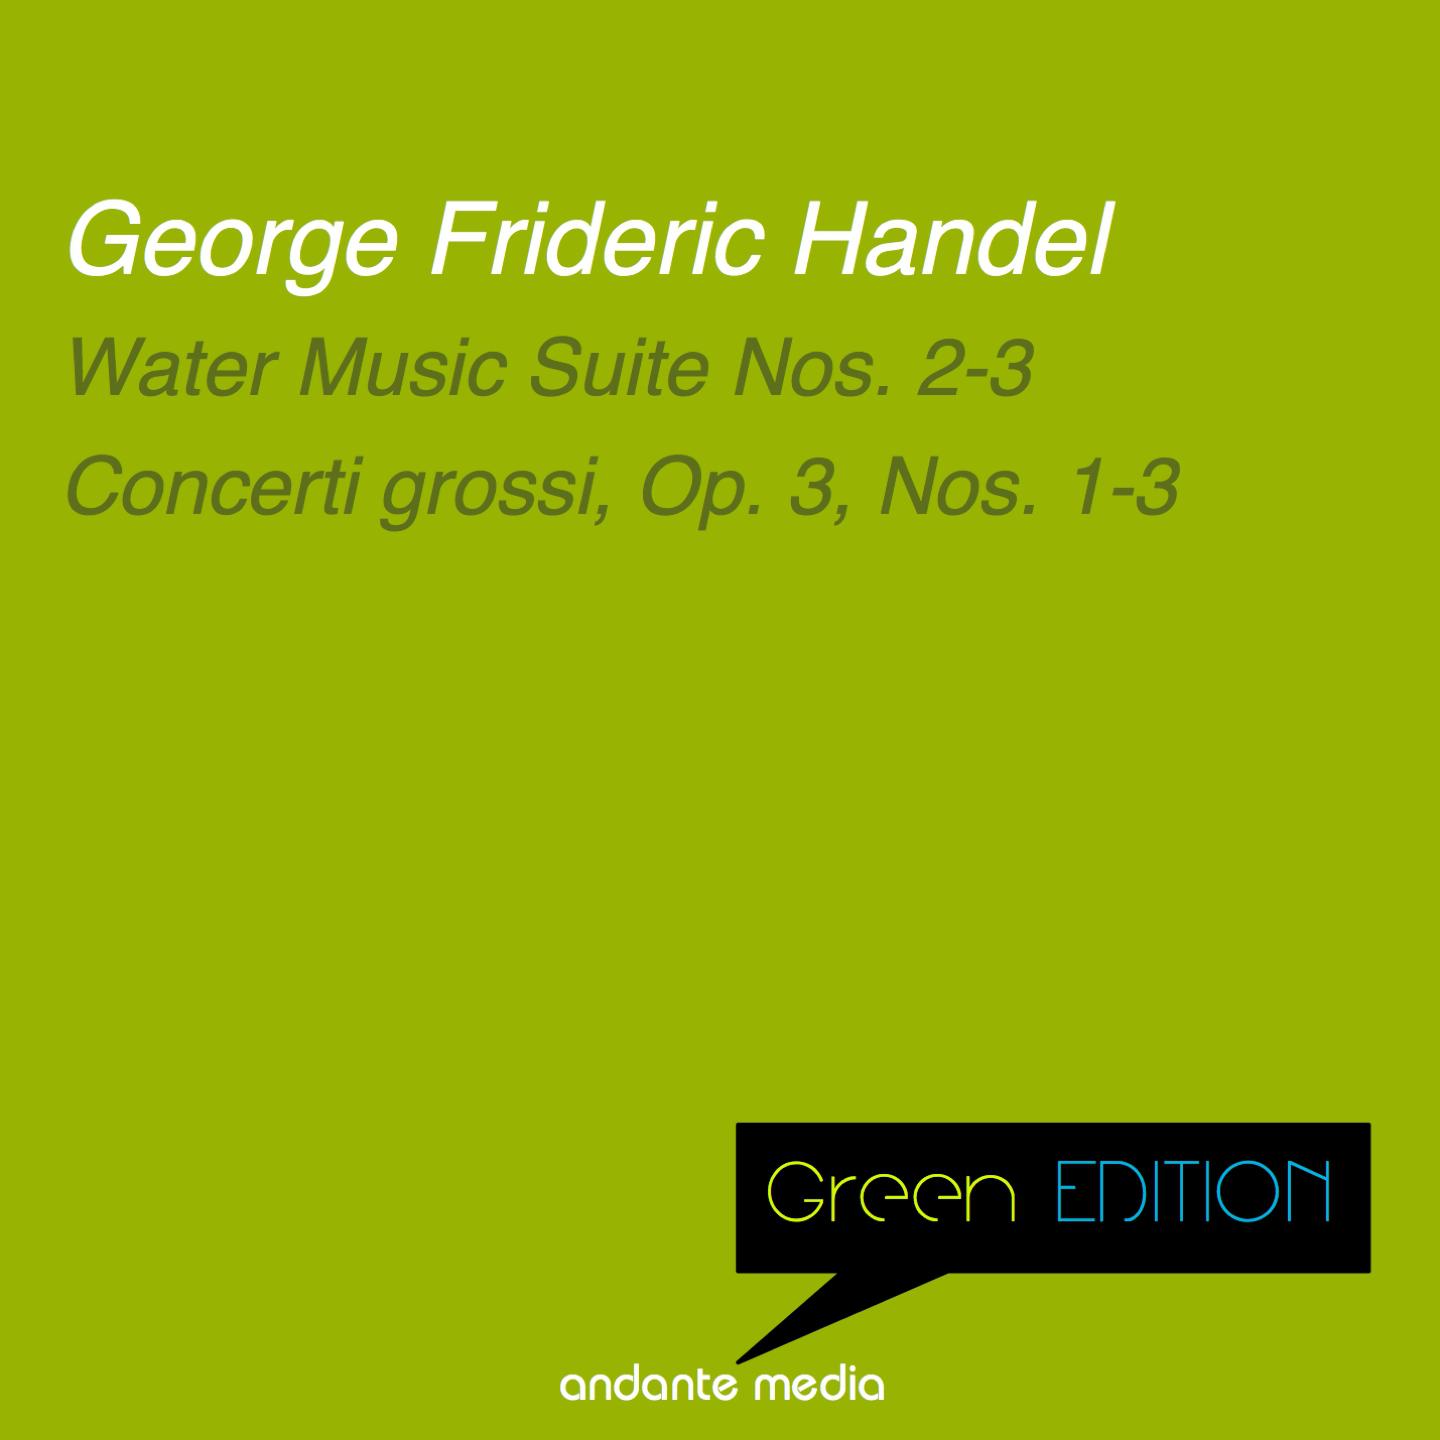 Water Music Suite No. 3 in G Major, HWV 350: Minuet I